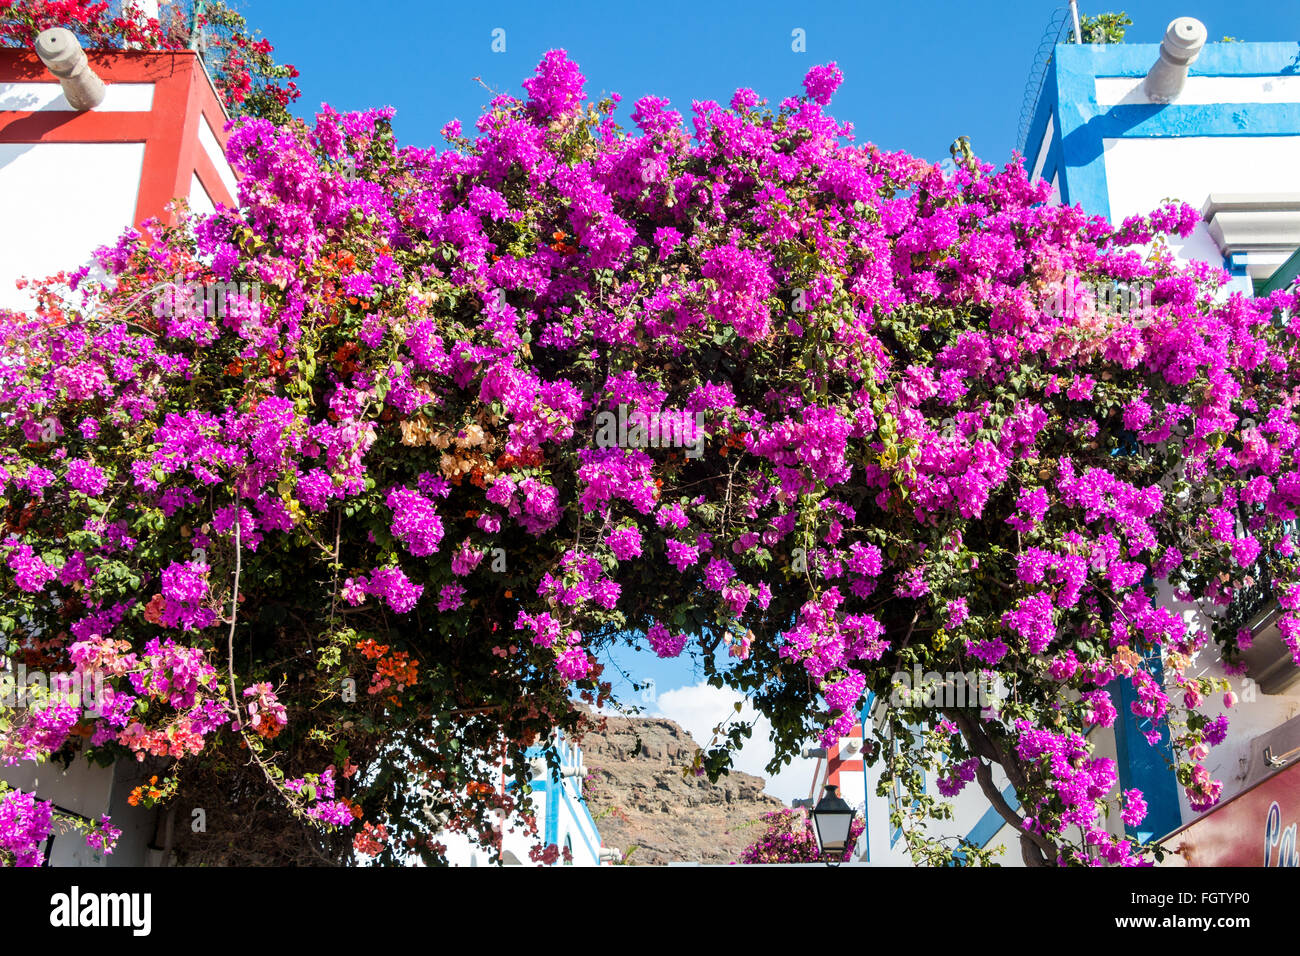 Archway decorated with flowers, Puerto de Mogan, Gran Canaria, Canary Islands, Spain, Europe Stock Photo